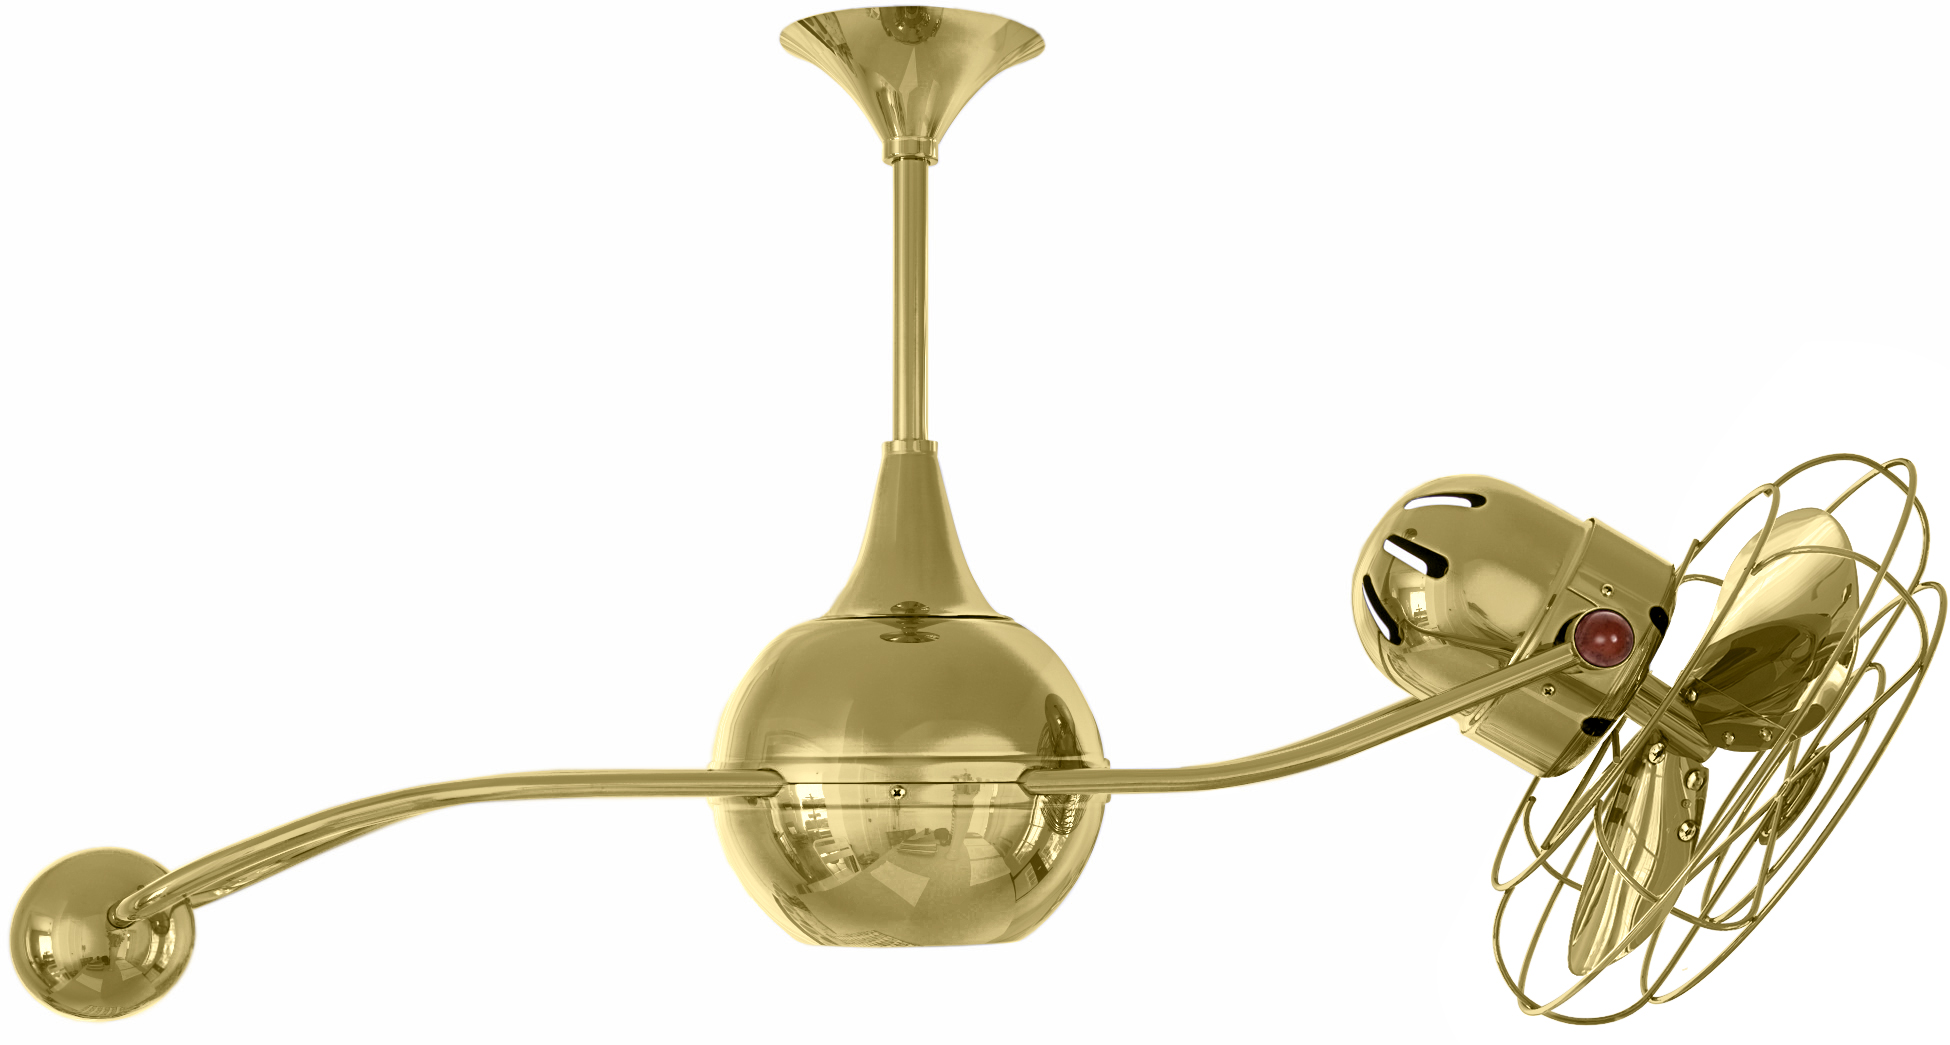 Brisa 2000 ceiling fan in polished brass finish with metal blades in decorative cage made by Matthews Fan Company.